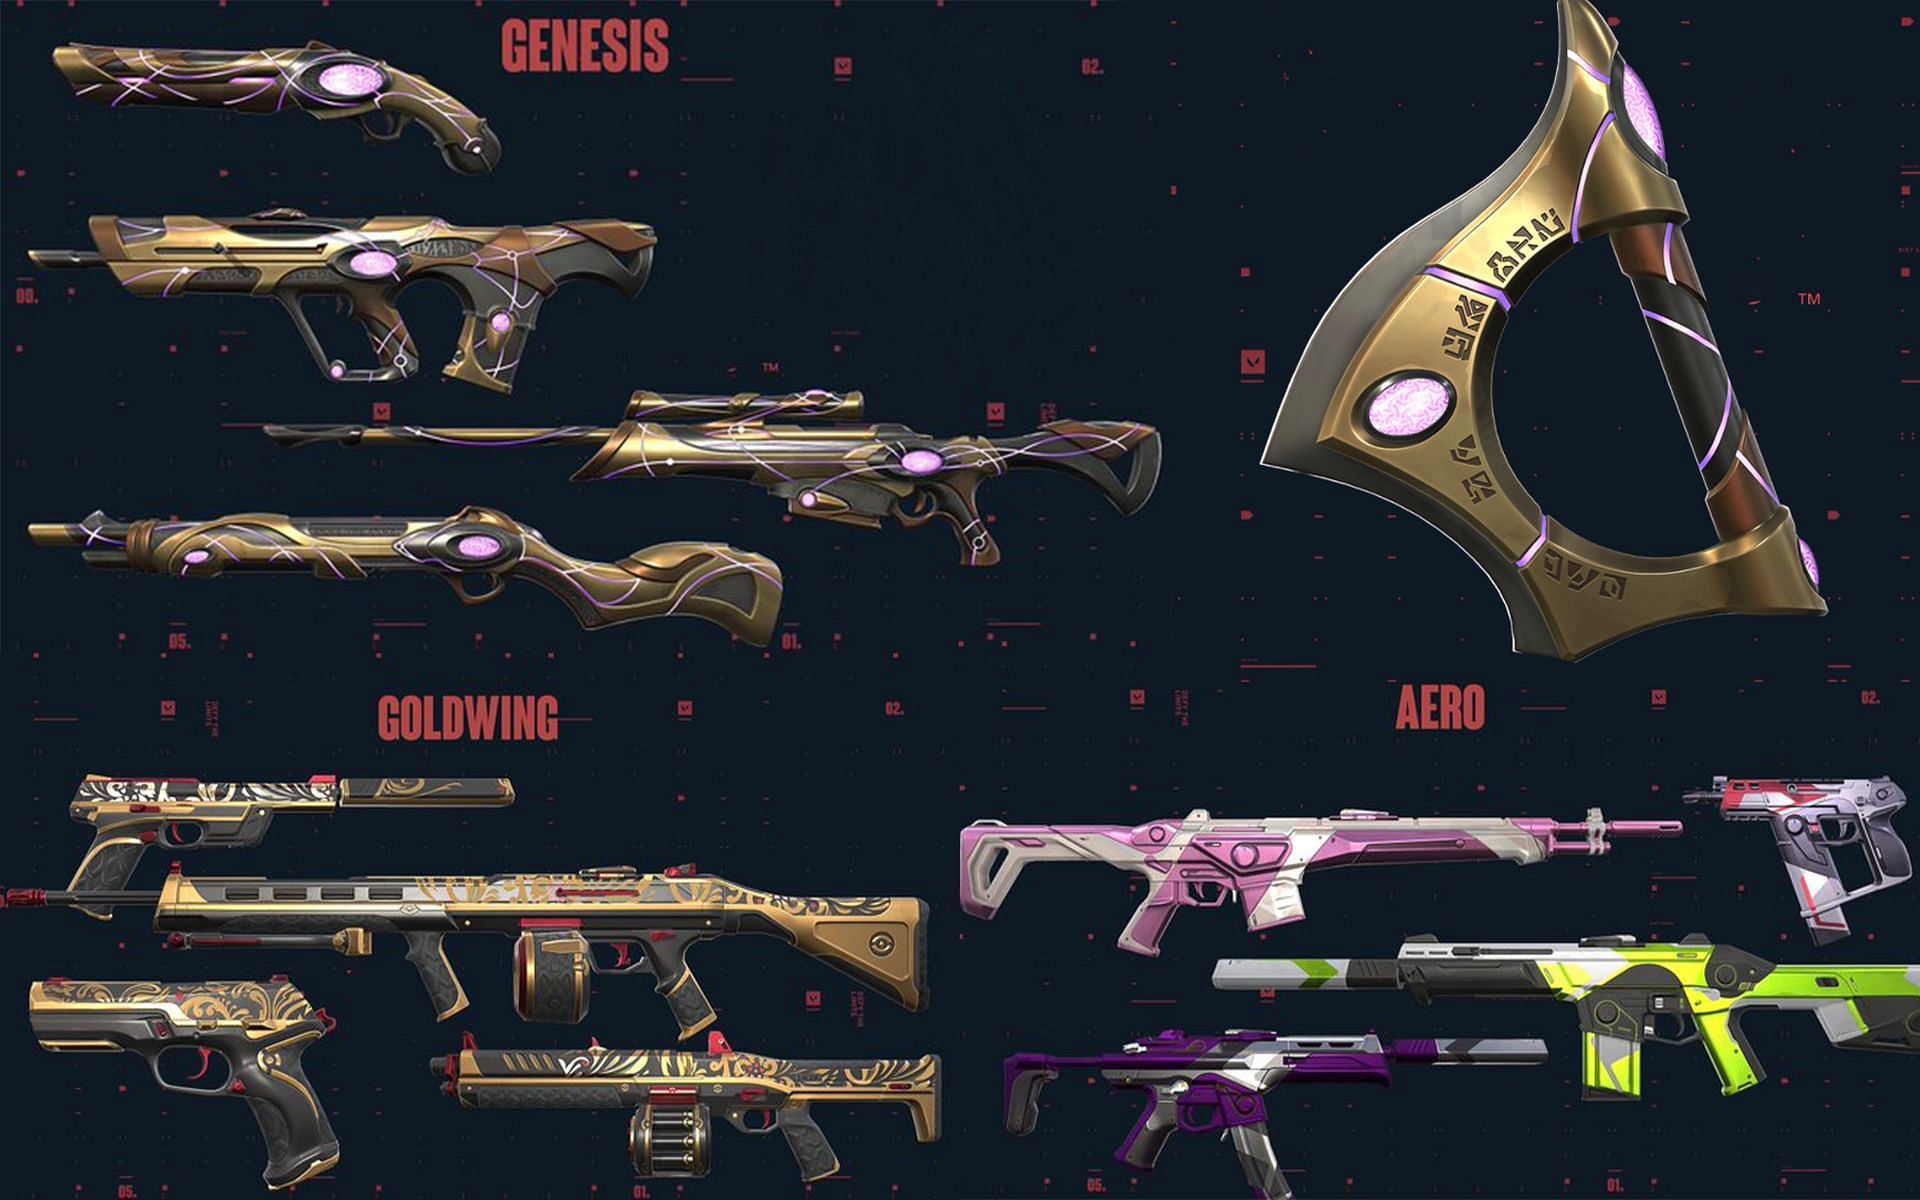 GEAR UP AND MOVE OUT! FIND YOUR NEW WEAPON SKIN IN VALORANT WITH  VIRTUOS-SPARX*! - Virtuos